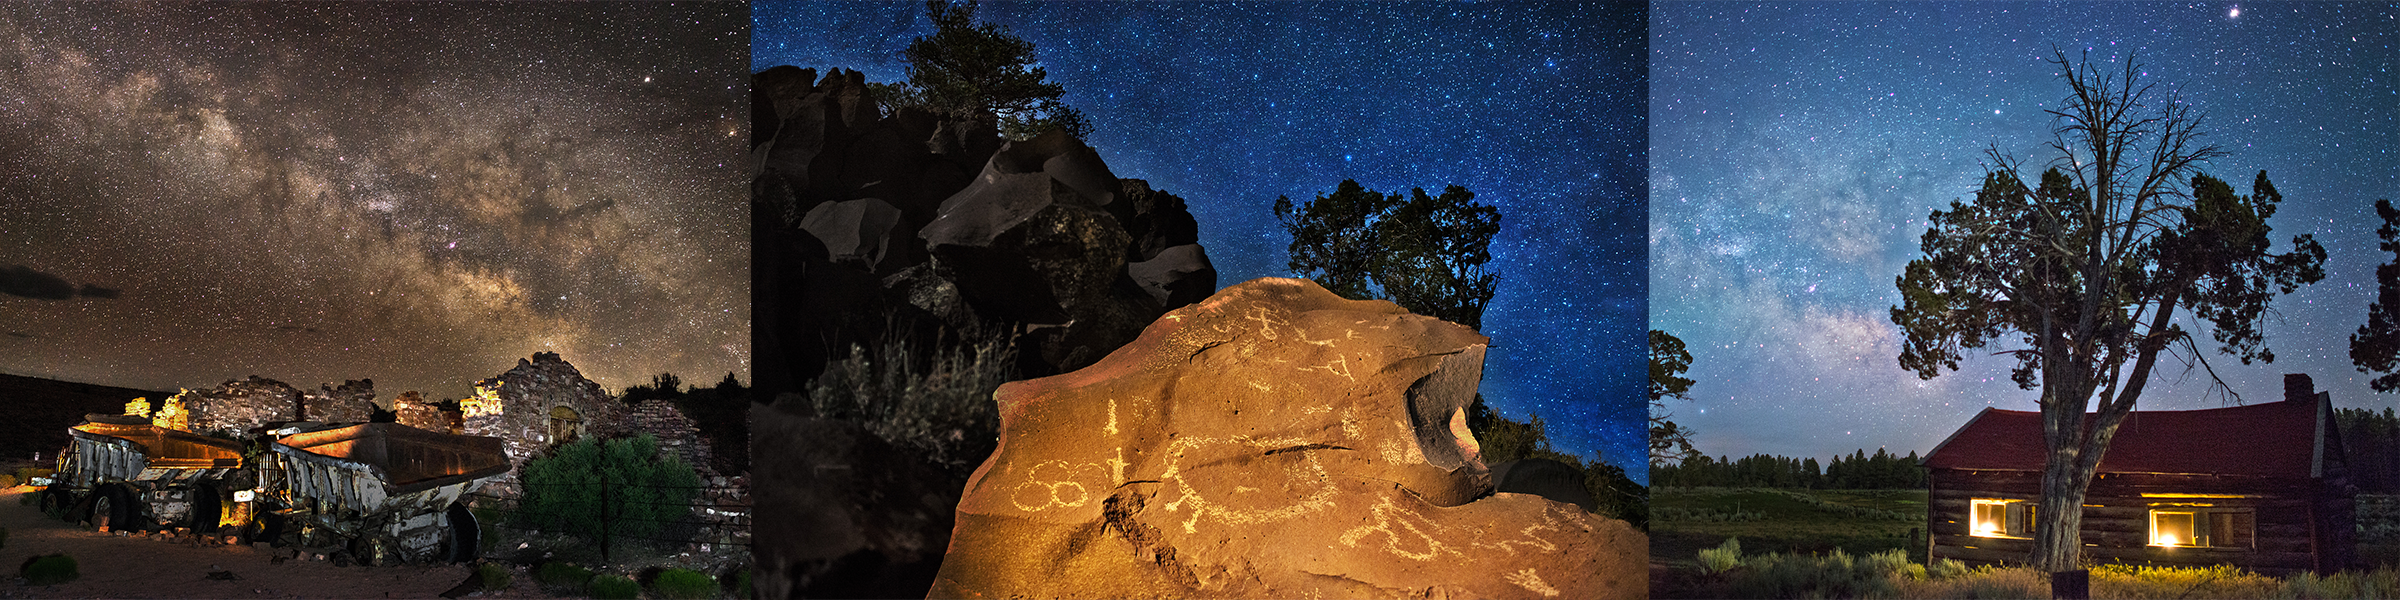 Composite of three images against a starry night sky: pictographs, a homestead cabin, and mining trucks.